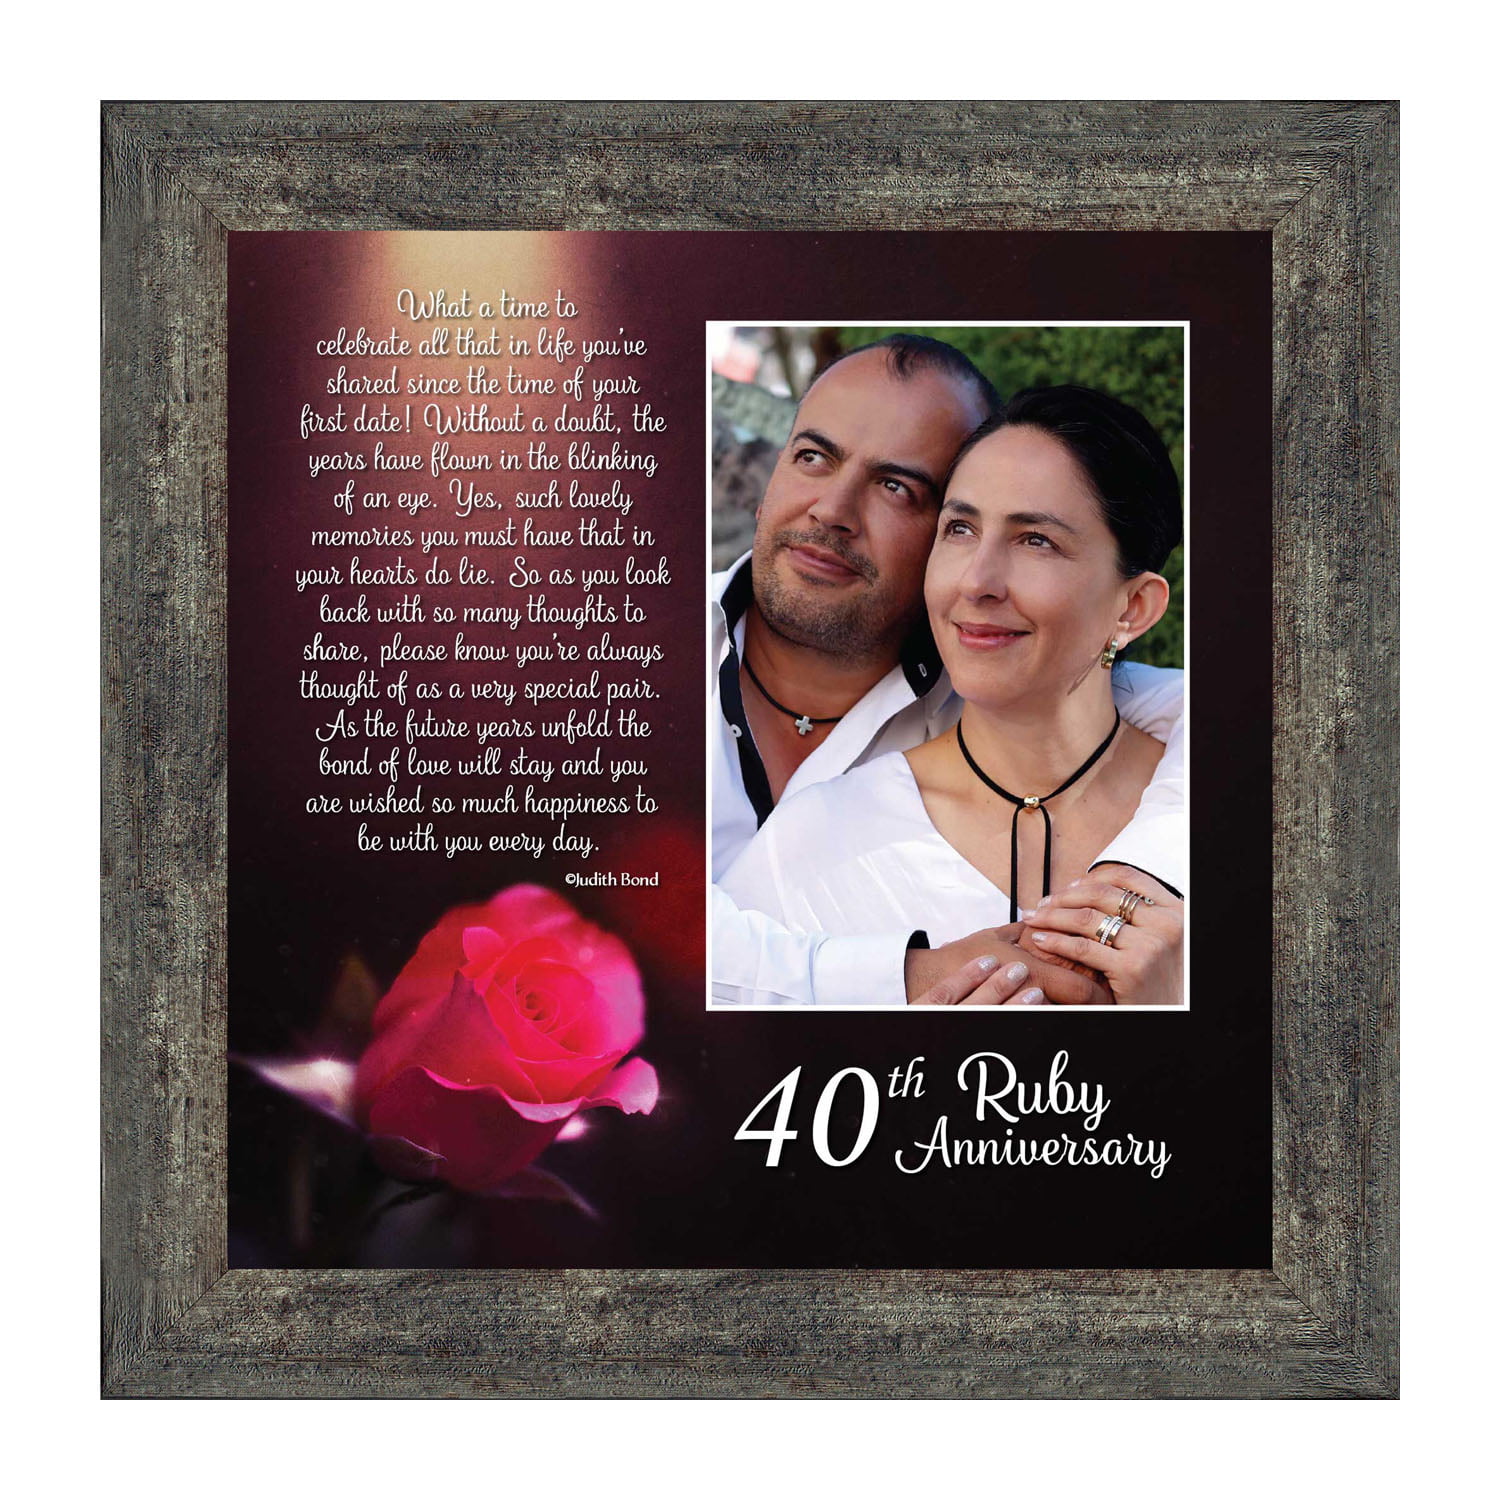 40th Birthday Ruby Wedding Anniversary Personalised Guest Book Signing Signature Autograph Photo Frame to Sign Gift Present Black Finish Frame